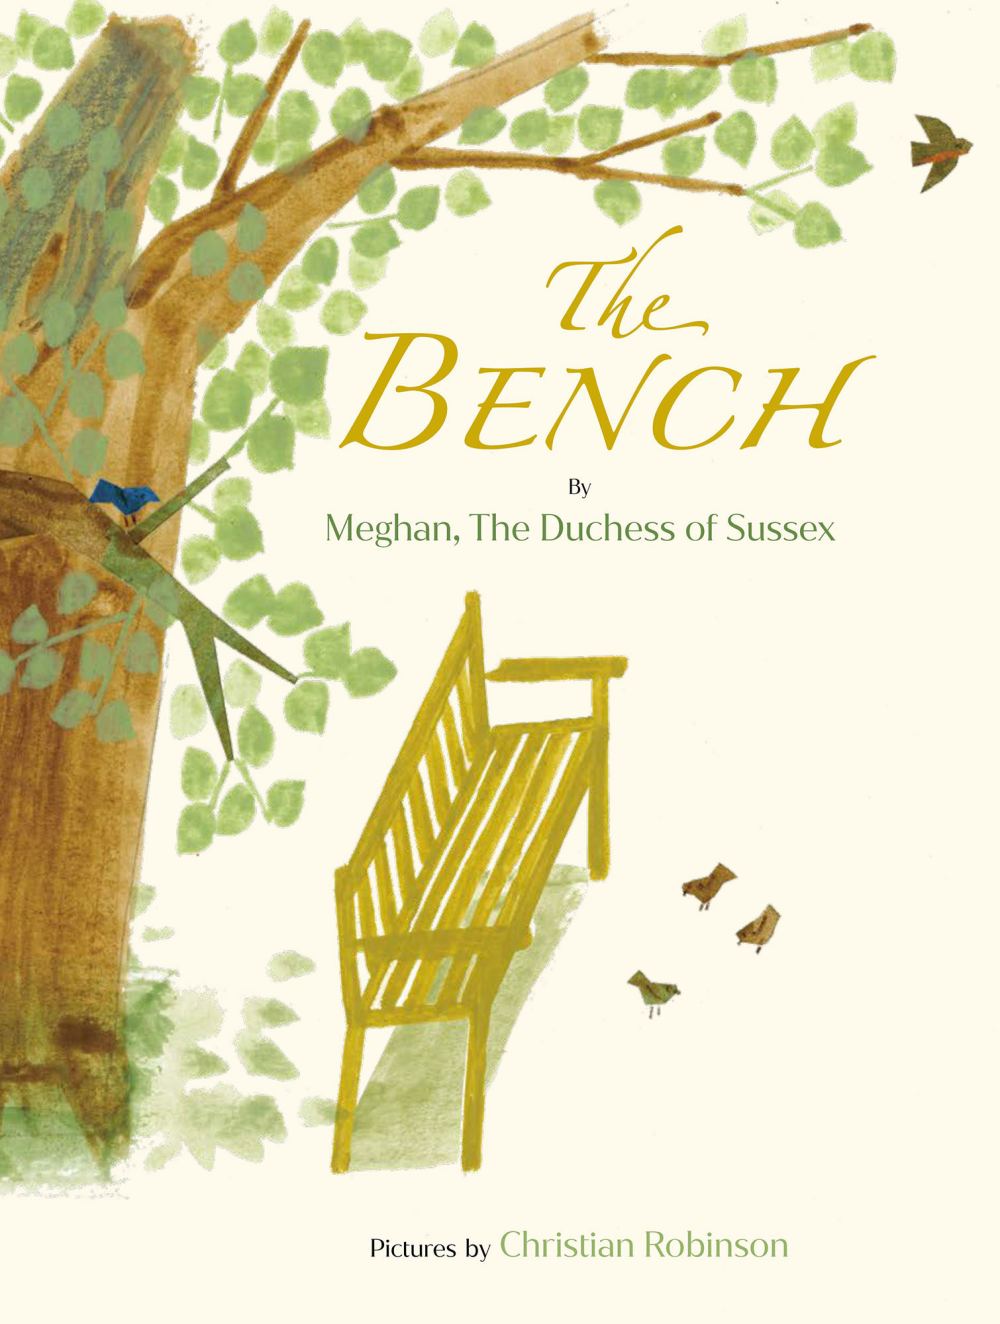 Meghan Markle Children’s Book Theme Is Deeply Personal The Bench